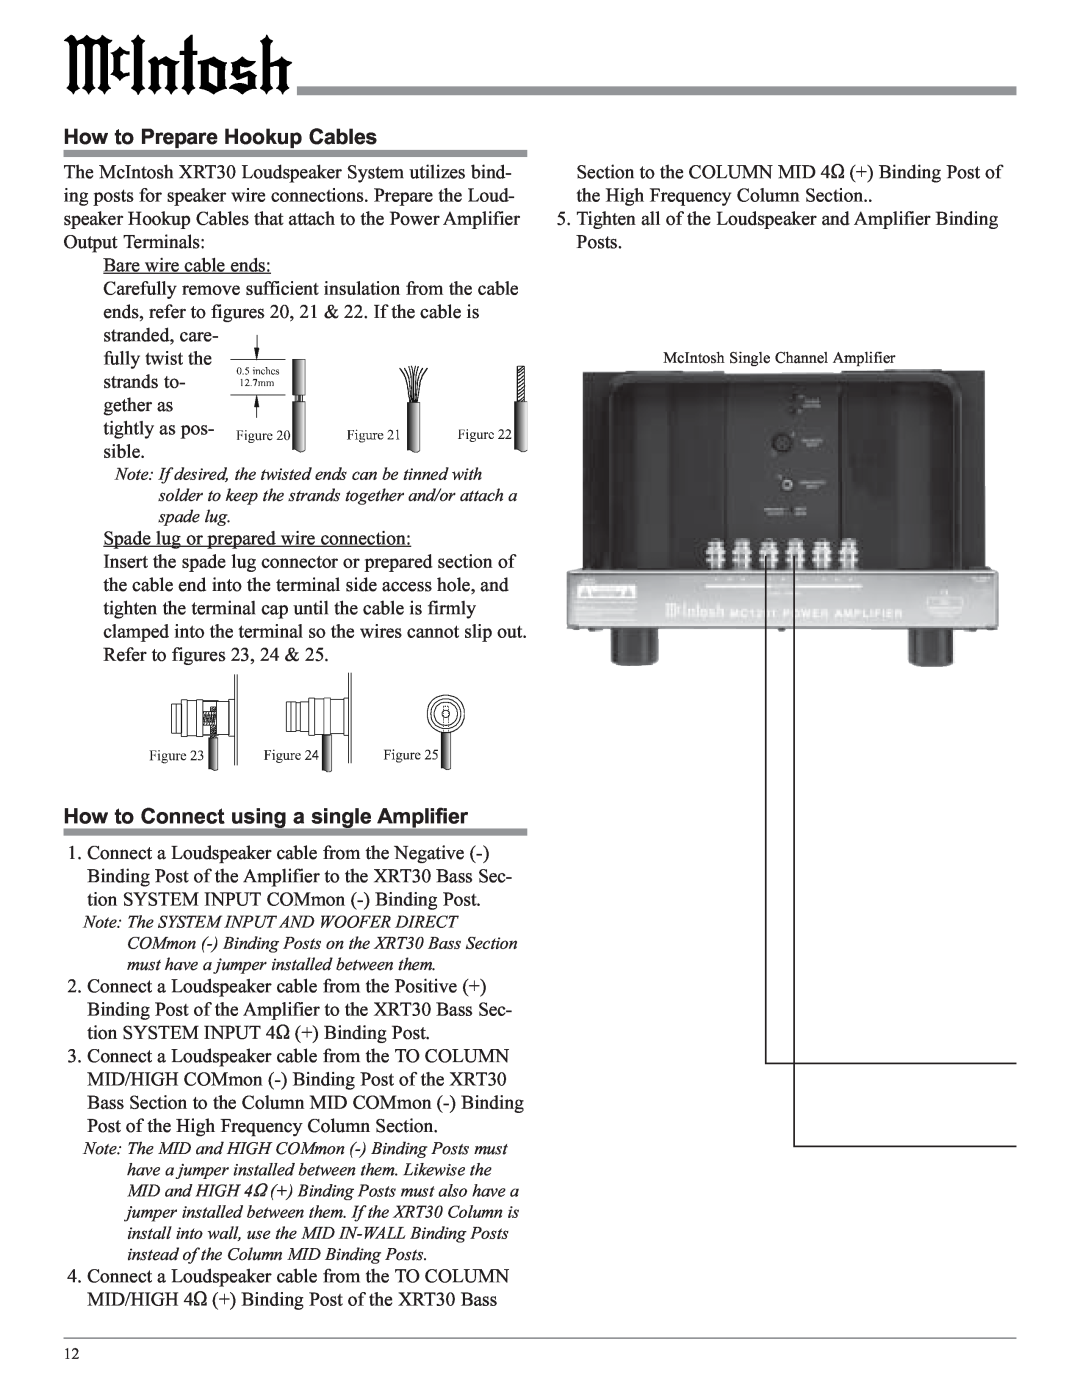 McIntosh XRT30 owner manual How to Prepare Hookup Cables, How to Connect using a single Amplifier 